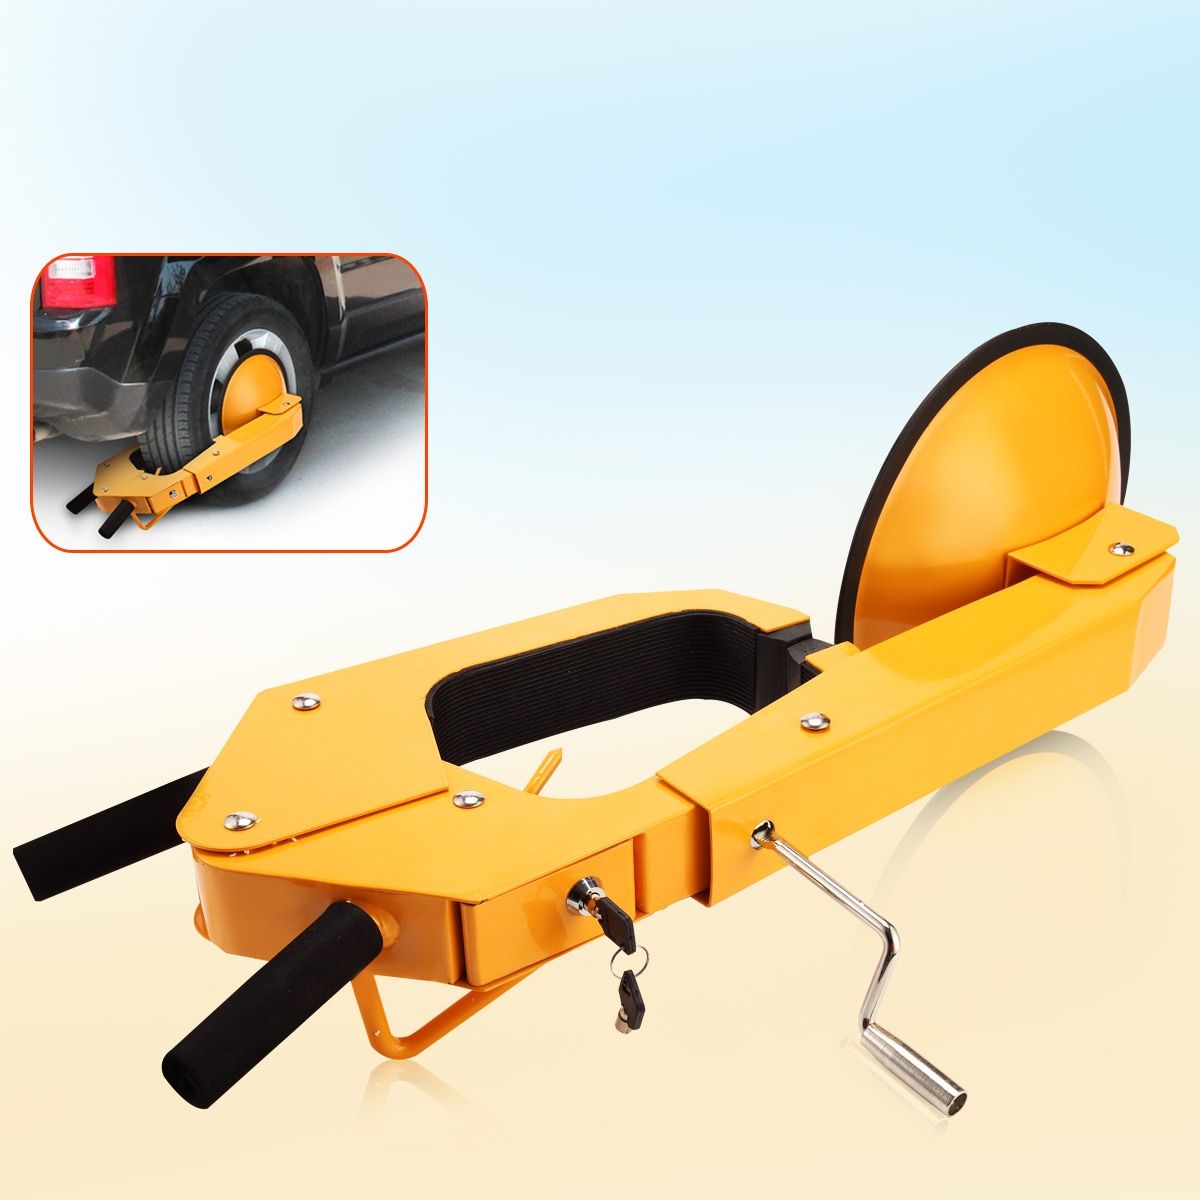 Heavy Duty Car Vehicle Wheel Clamp Lock for Cars Trailers Caravans and light Commercial Trucks